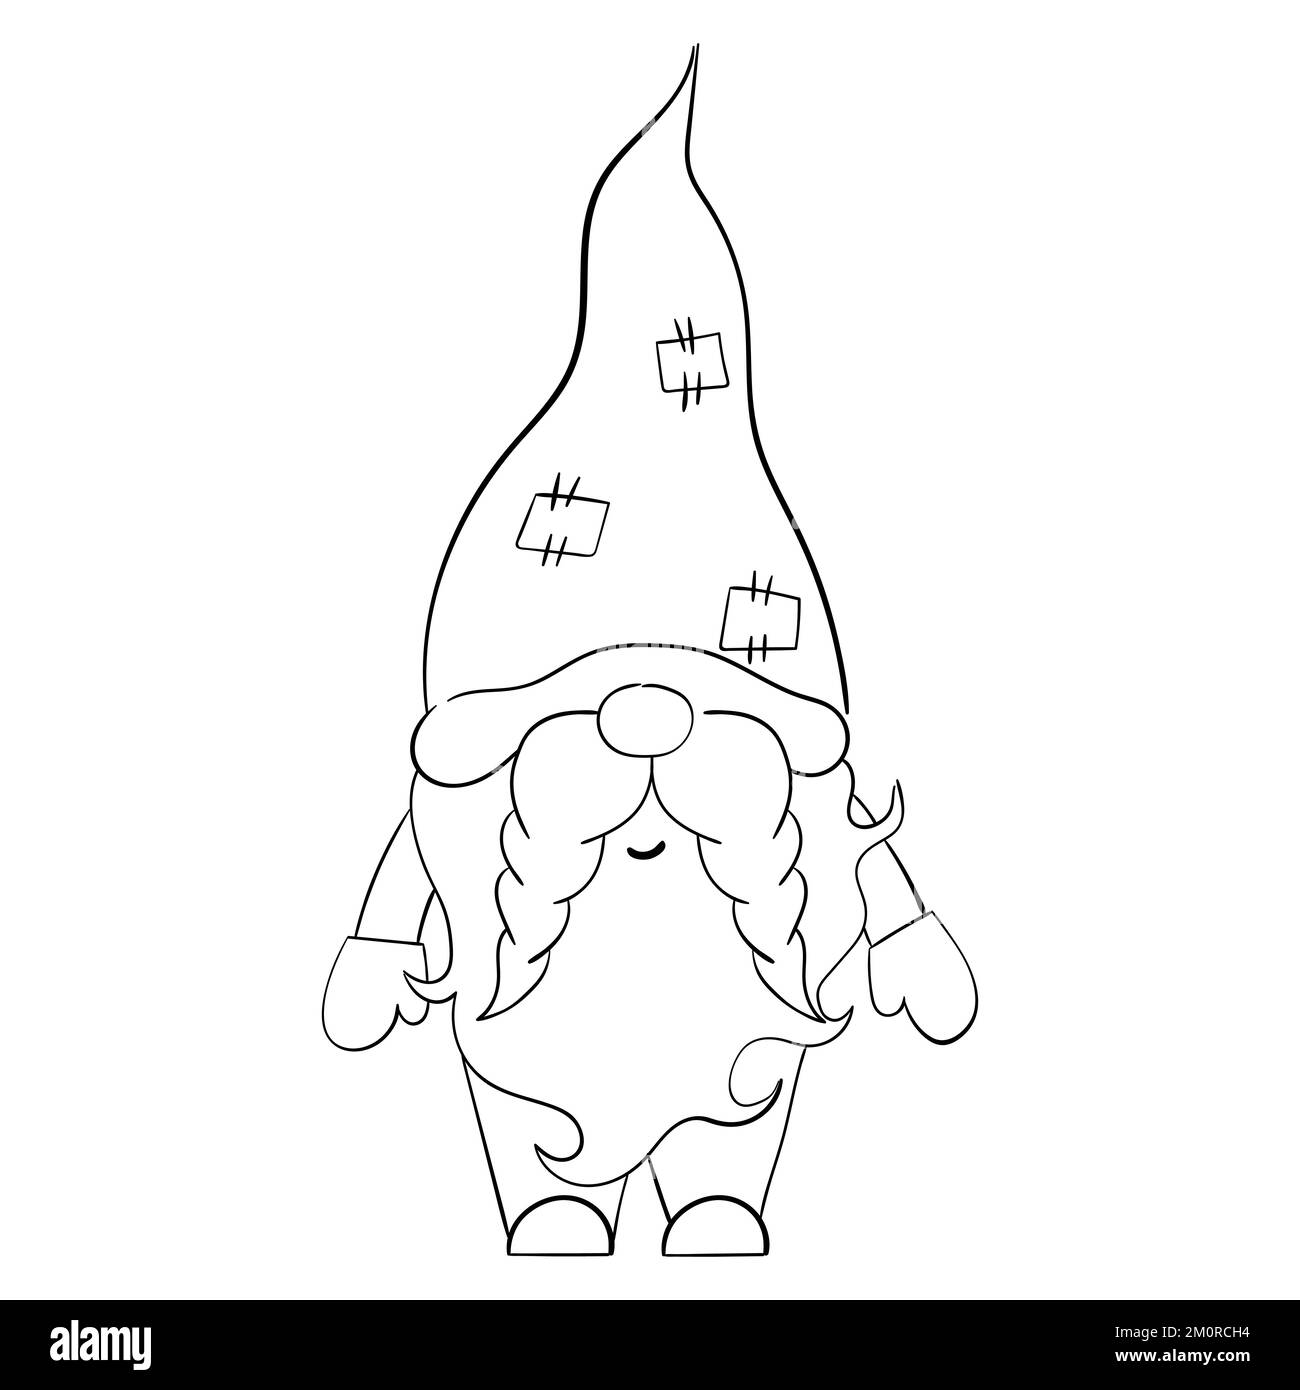 Cartoon Christmas gnome for coloring books. Linear design for children's coloring books. Stock Vector